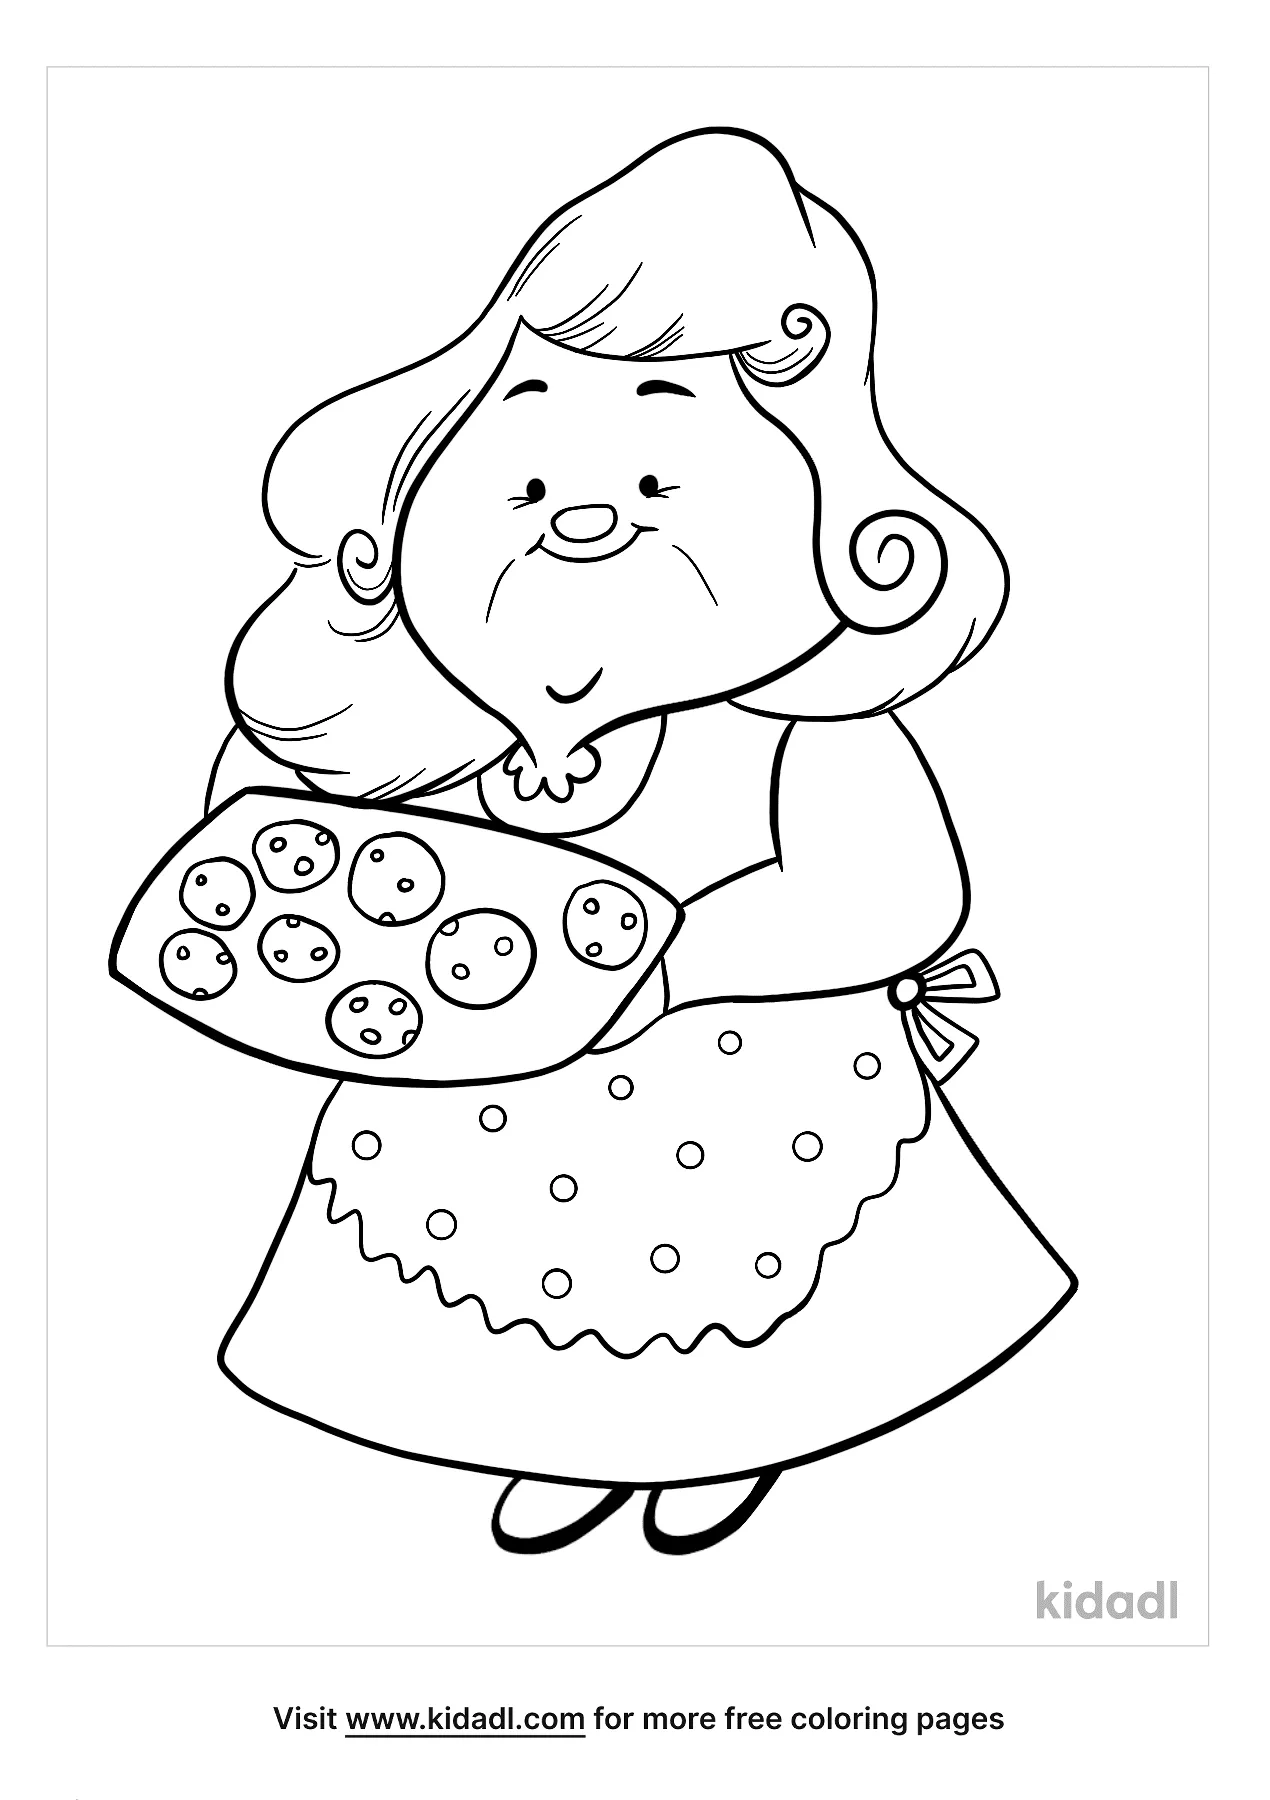 old-lady-coloring-pages